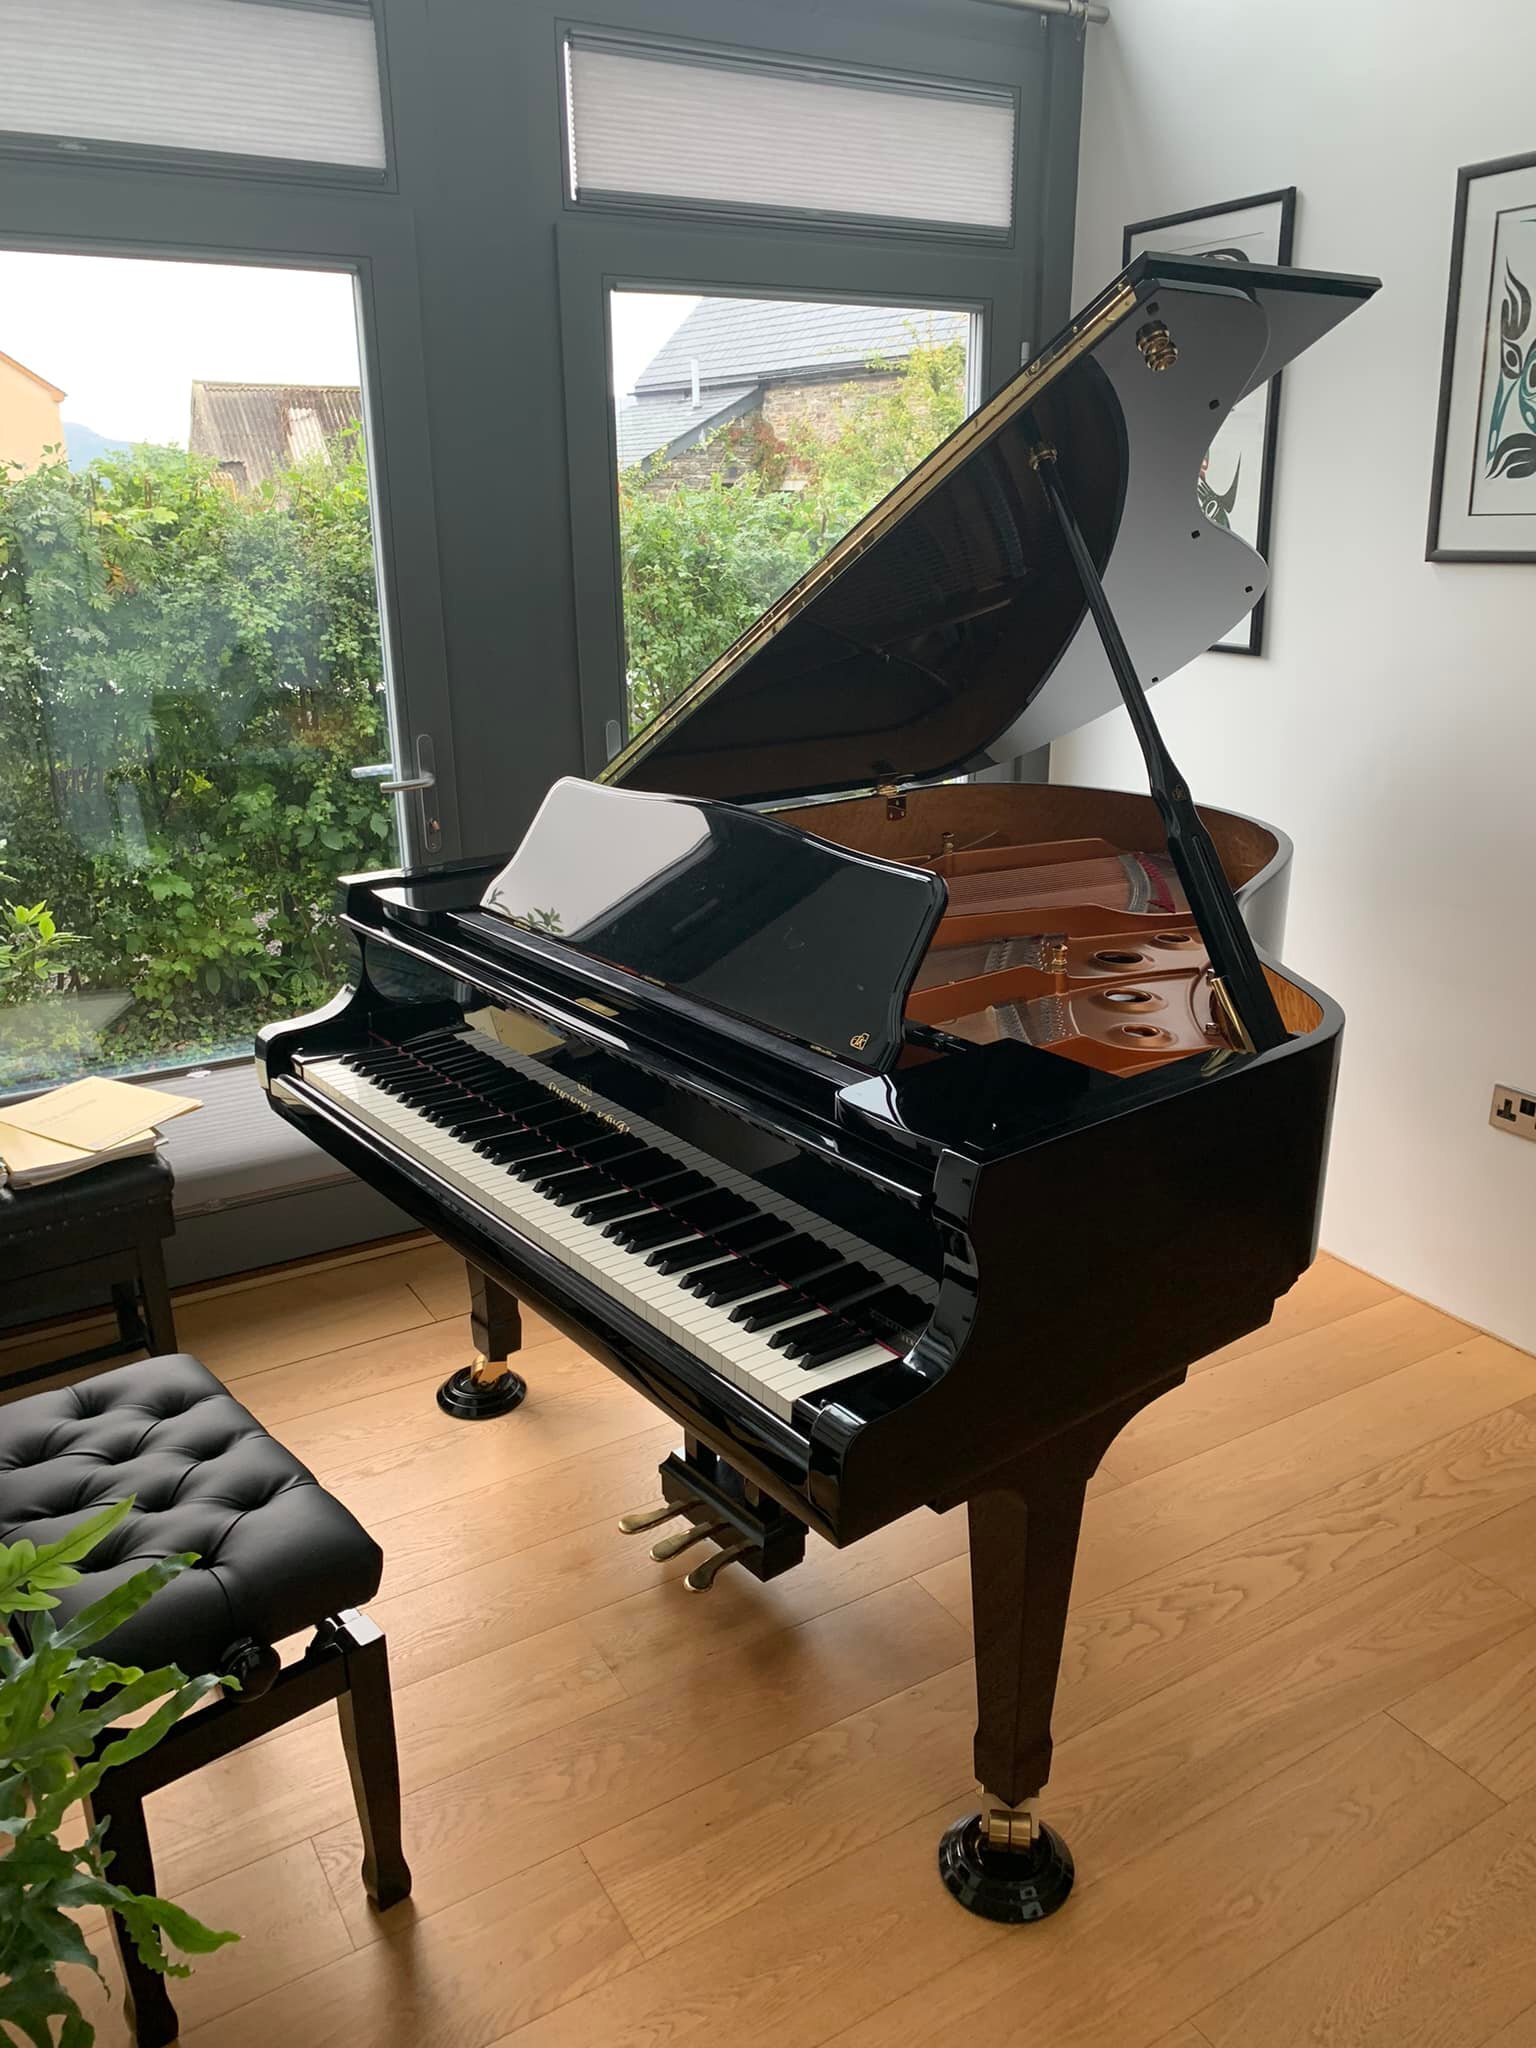 Lucky enough to tune this little gem! A Shigeru Kawai in Powys. A beautiful instrument that was a joy to tune. Kiss goodbye to &pound;31000 to have this in your front room! Lush! 😎🎹